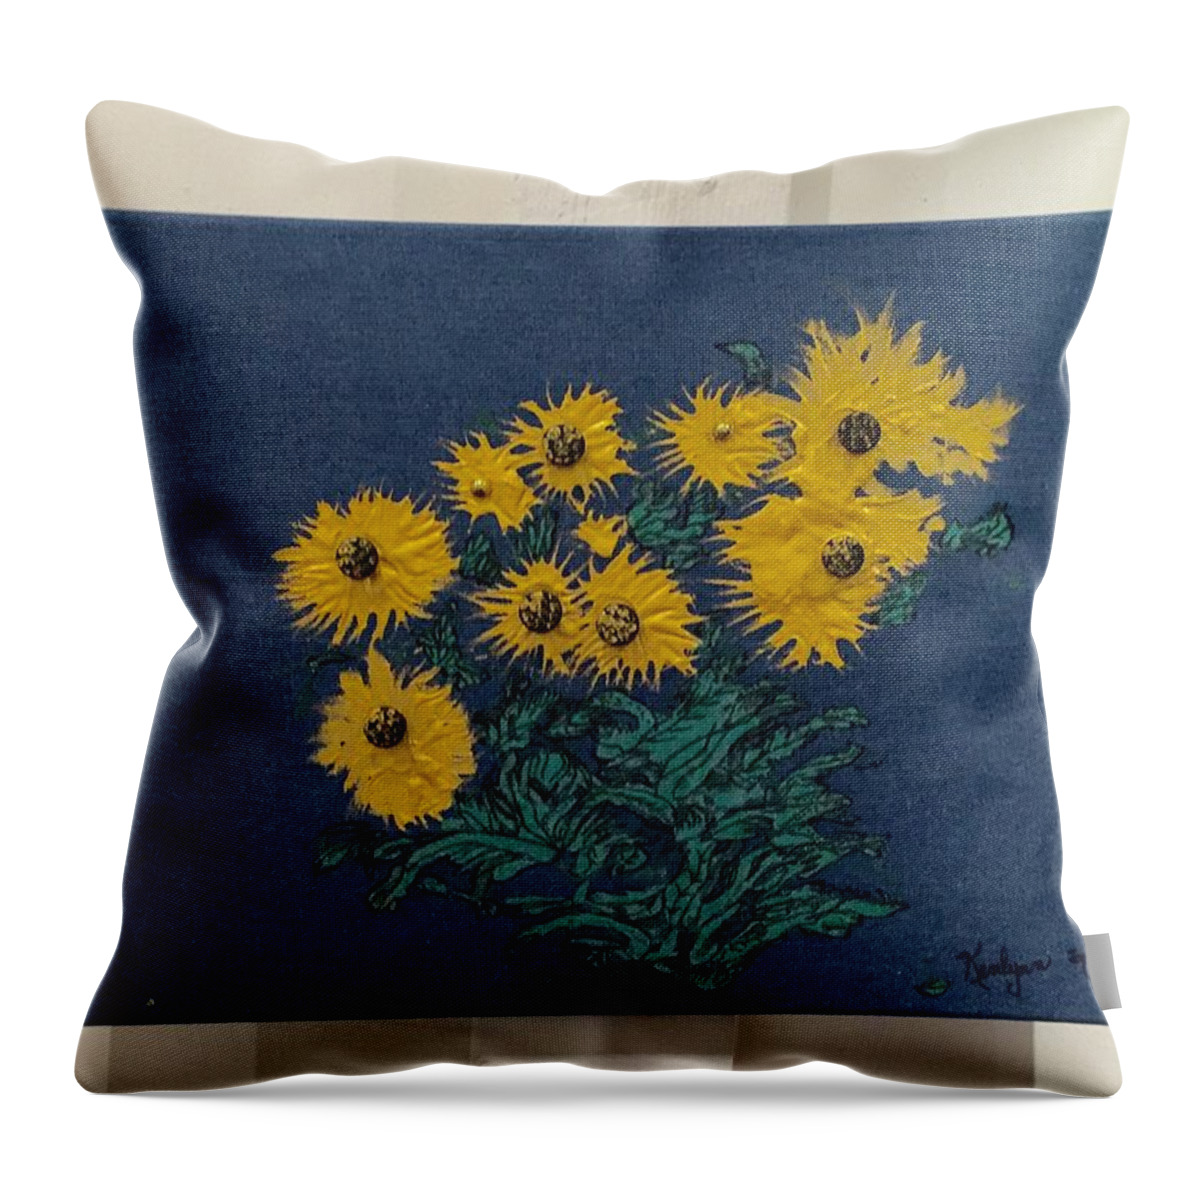 Blackeyed Susans Throw Pillow featuring the painting Blackeyed Susans by Kenlynn Schroeder